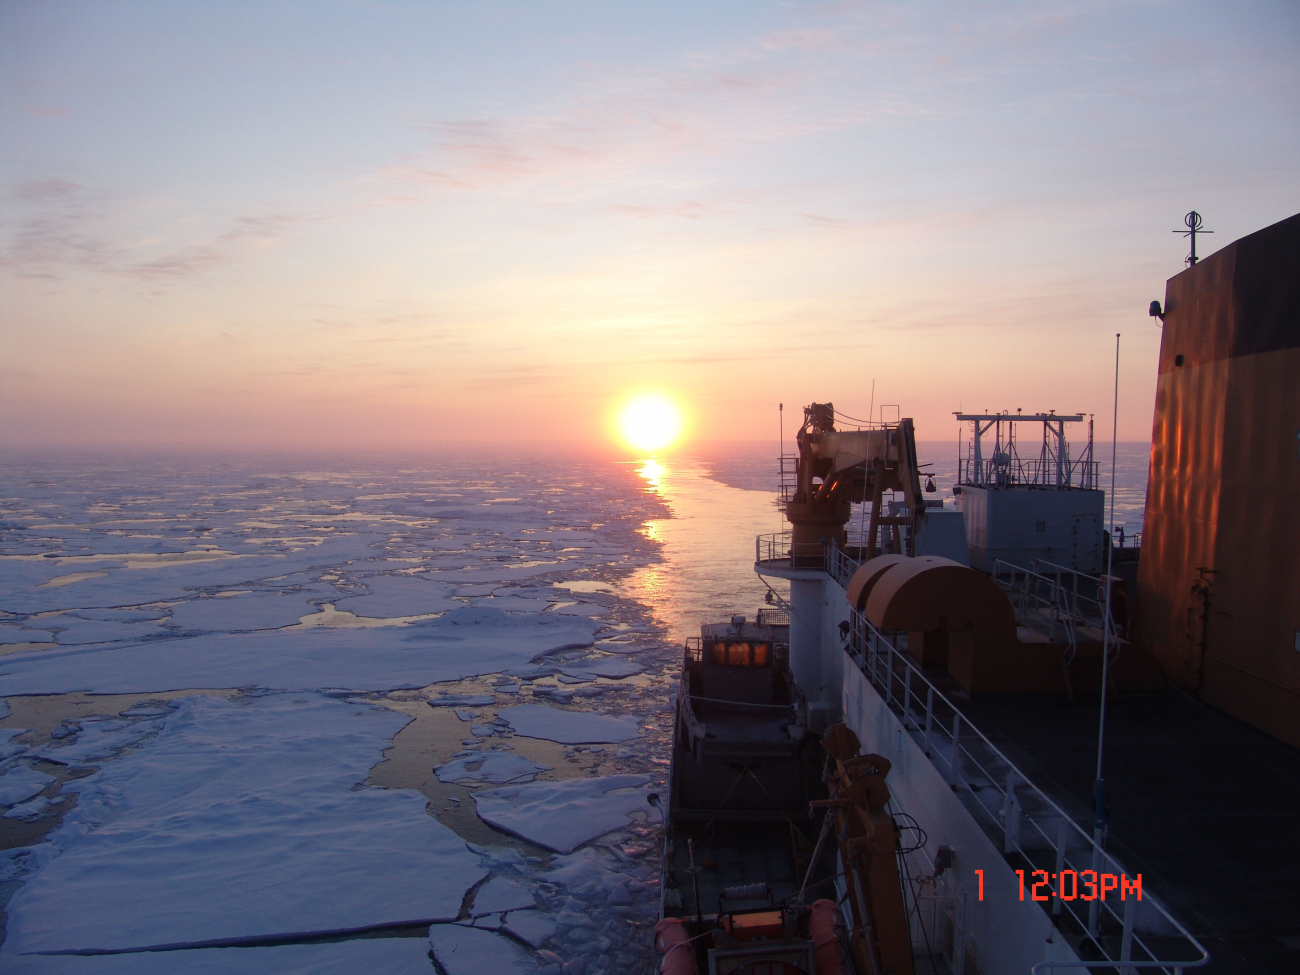 CGC HEALY passing through an area of first year ice floes with the sundirectly astern